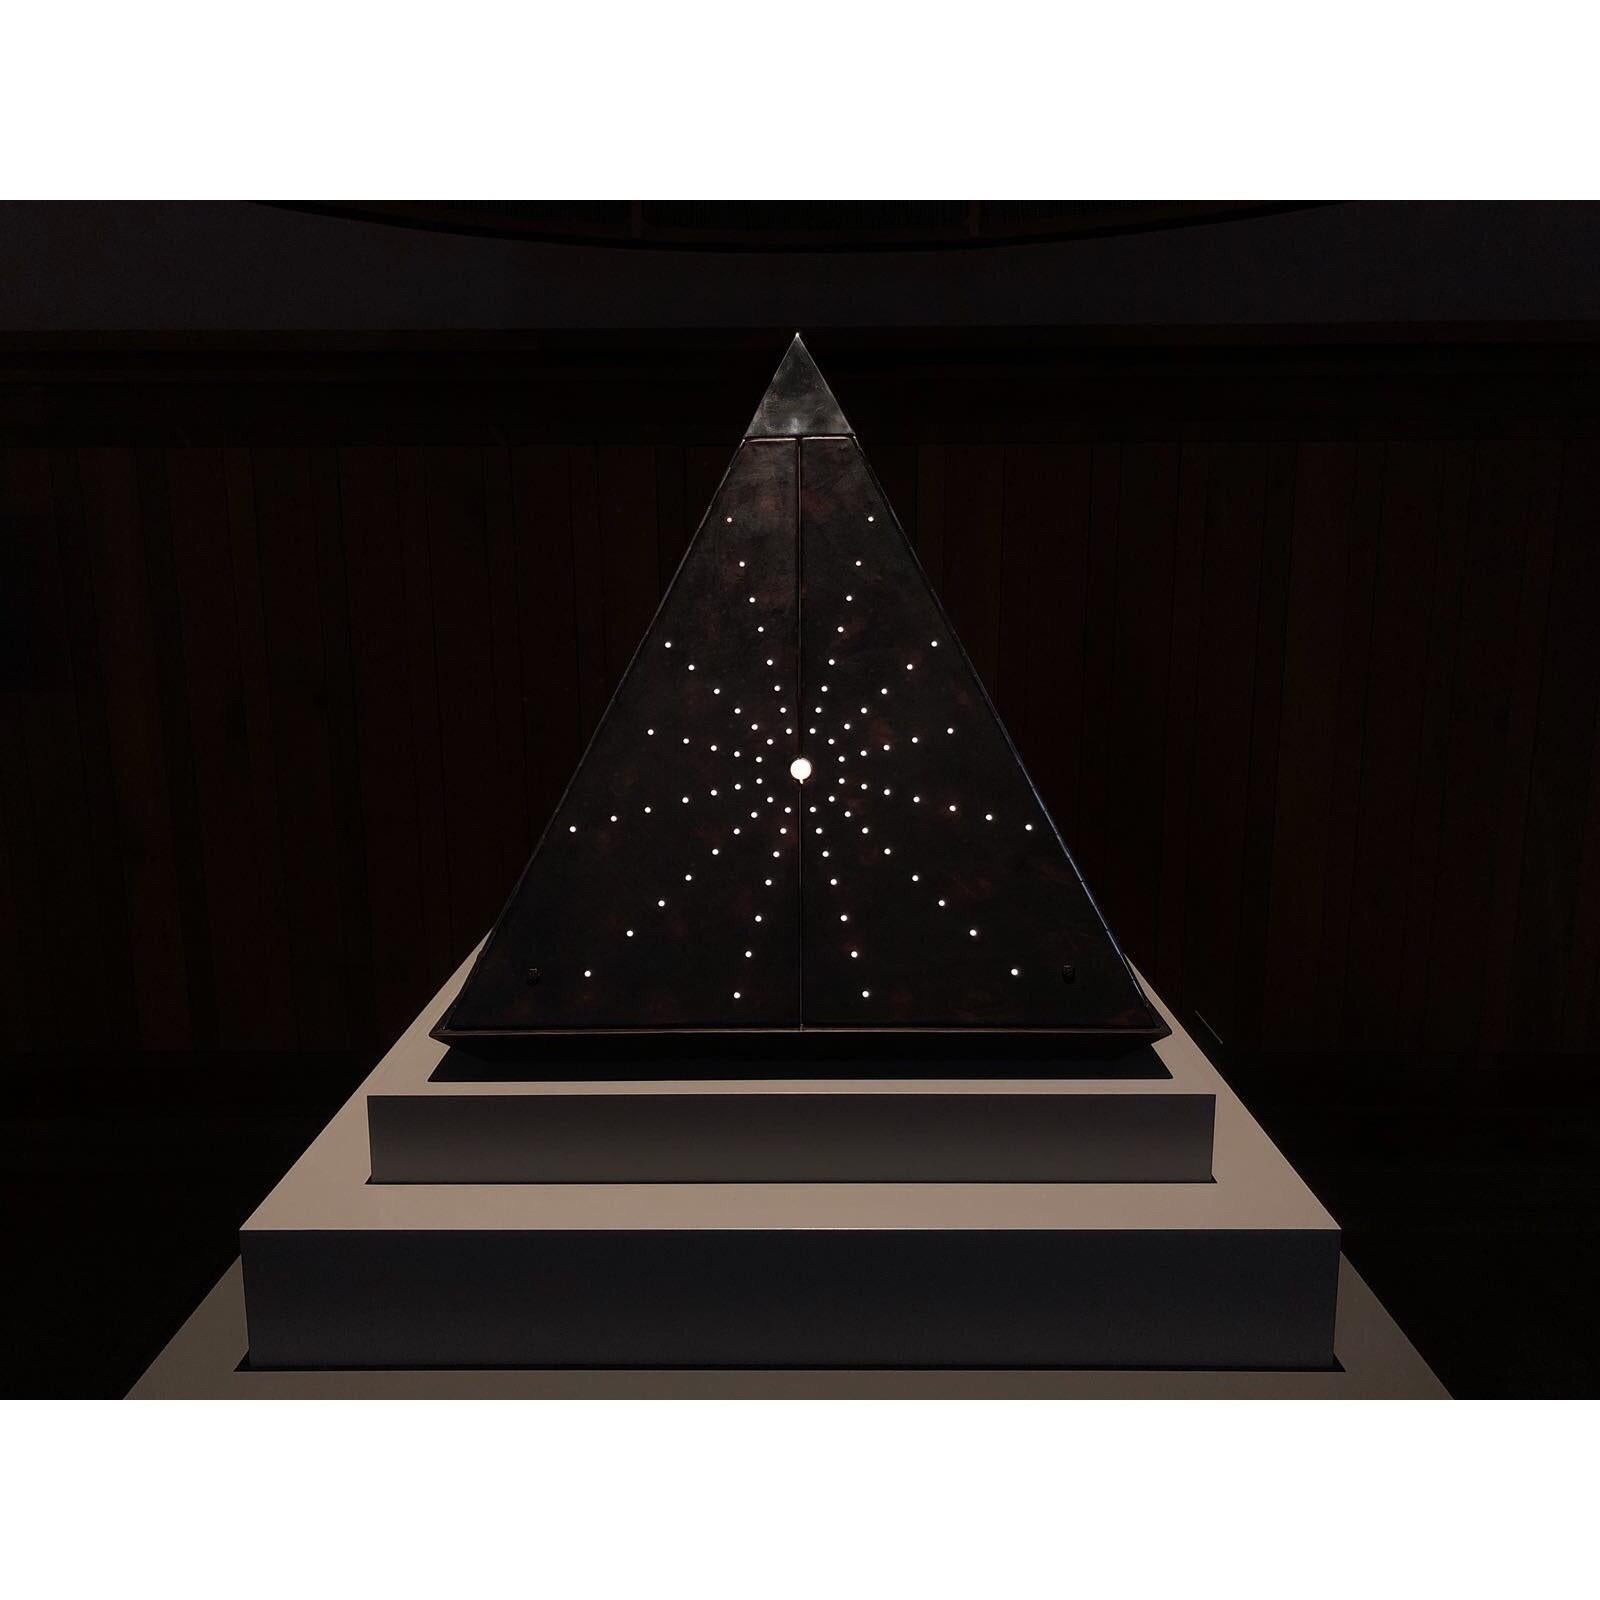 Starry Pyramid by Oscar Tusquets and Pere Ventura for Exhibition-event Homo Faber celebrada en Venezia septiembre 2018.

Limited edition of 8

A pyramid shaped tabernacle.
Leather covered faces, coarse and masculine on the outside, delicate and